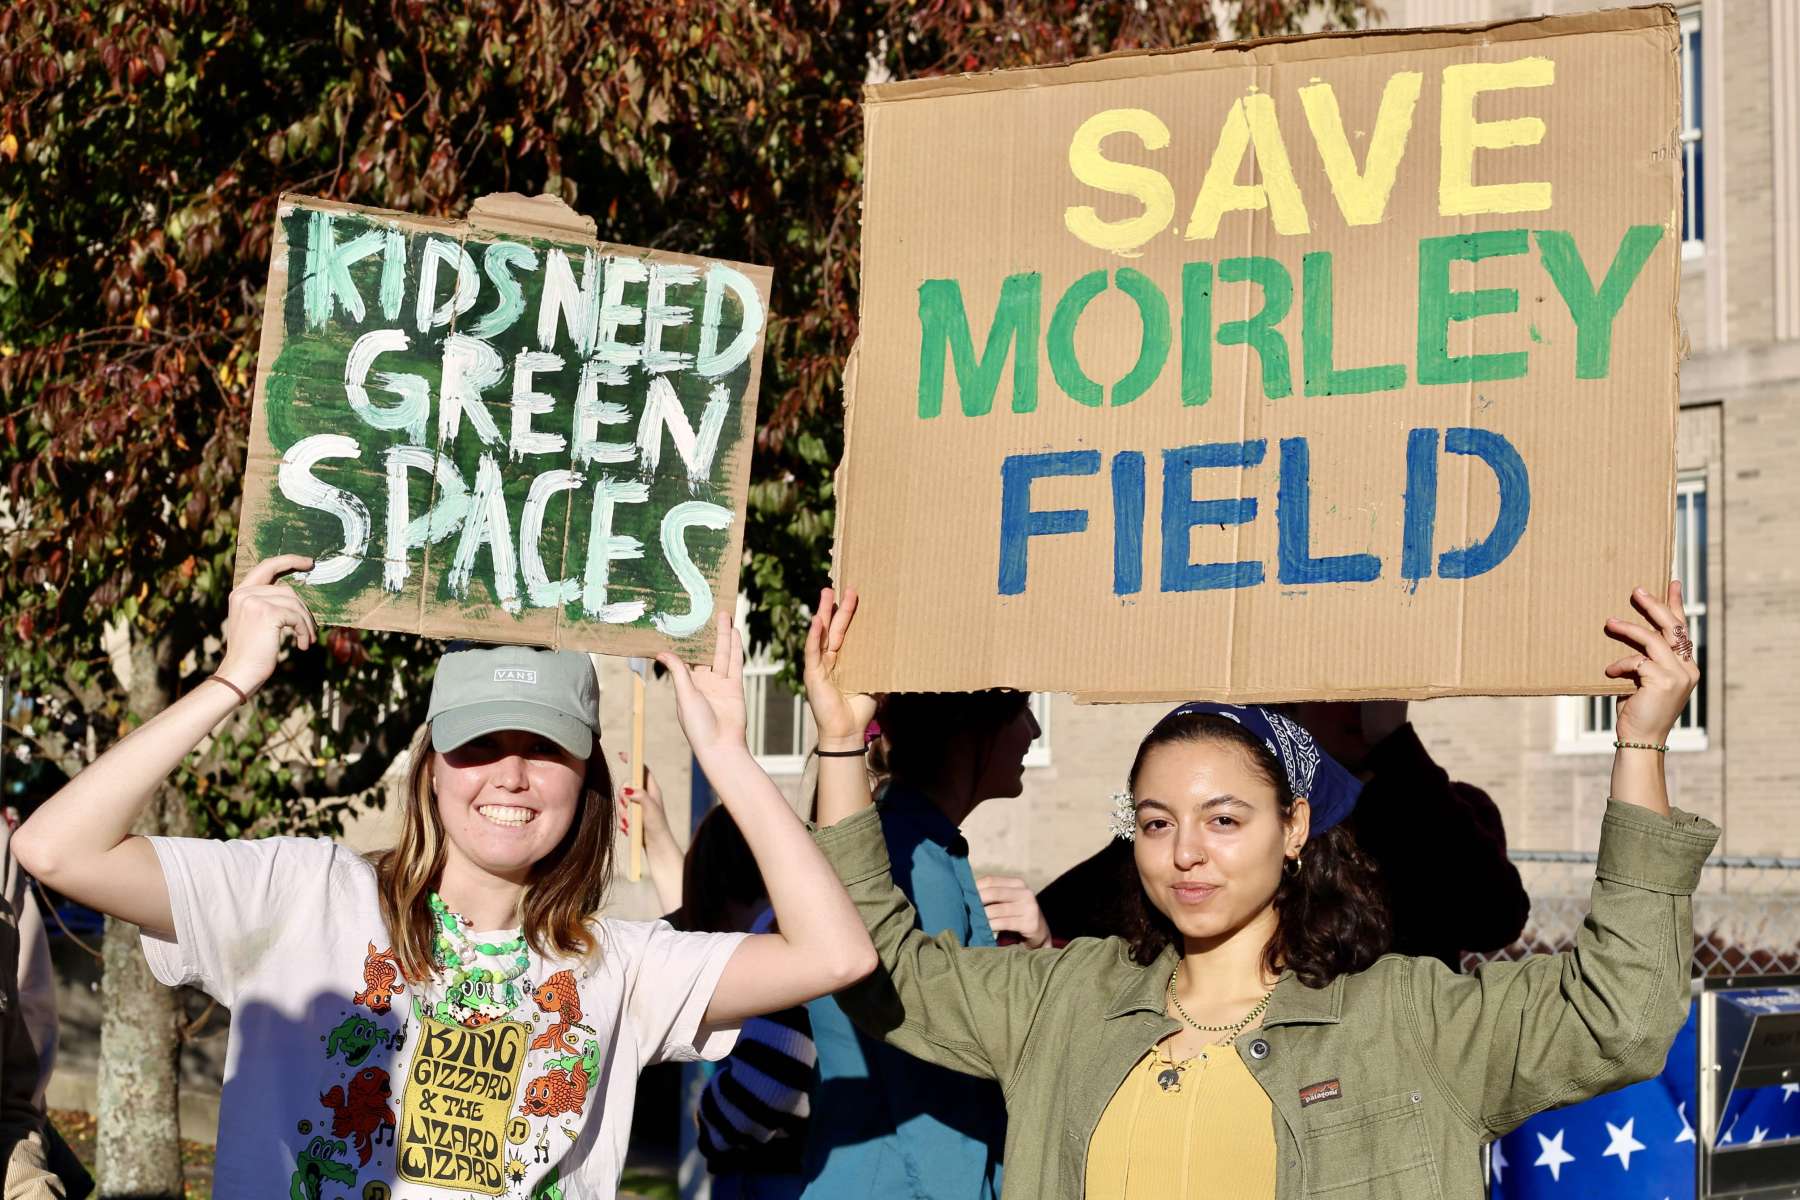 Rhode Island News: Rally to save Pawtucket’s Morley Field as city ignores residents’ pleas